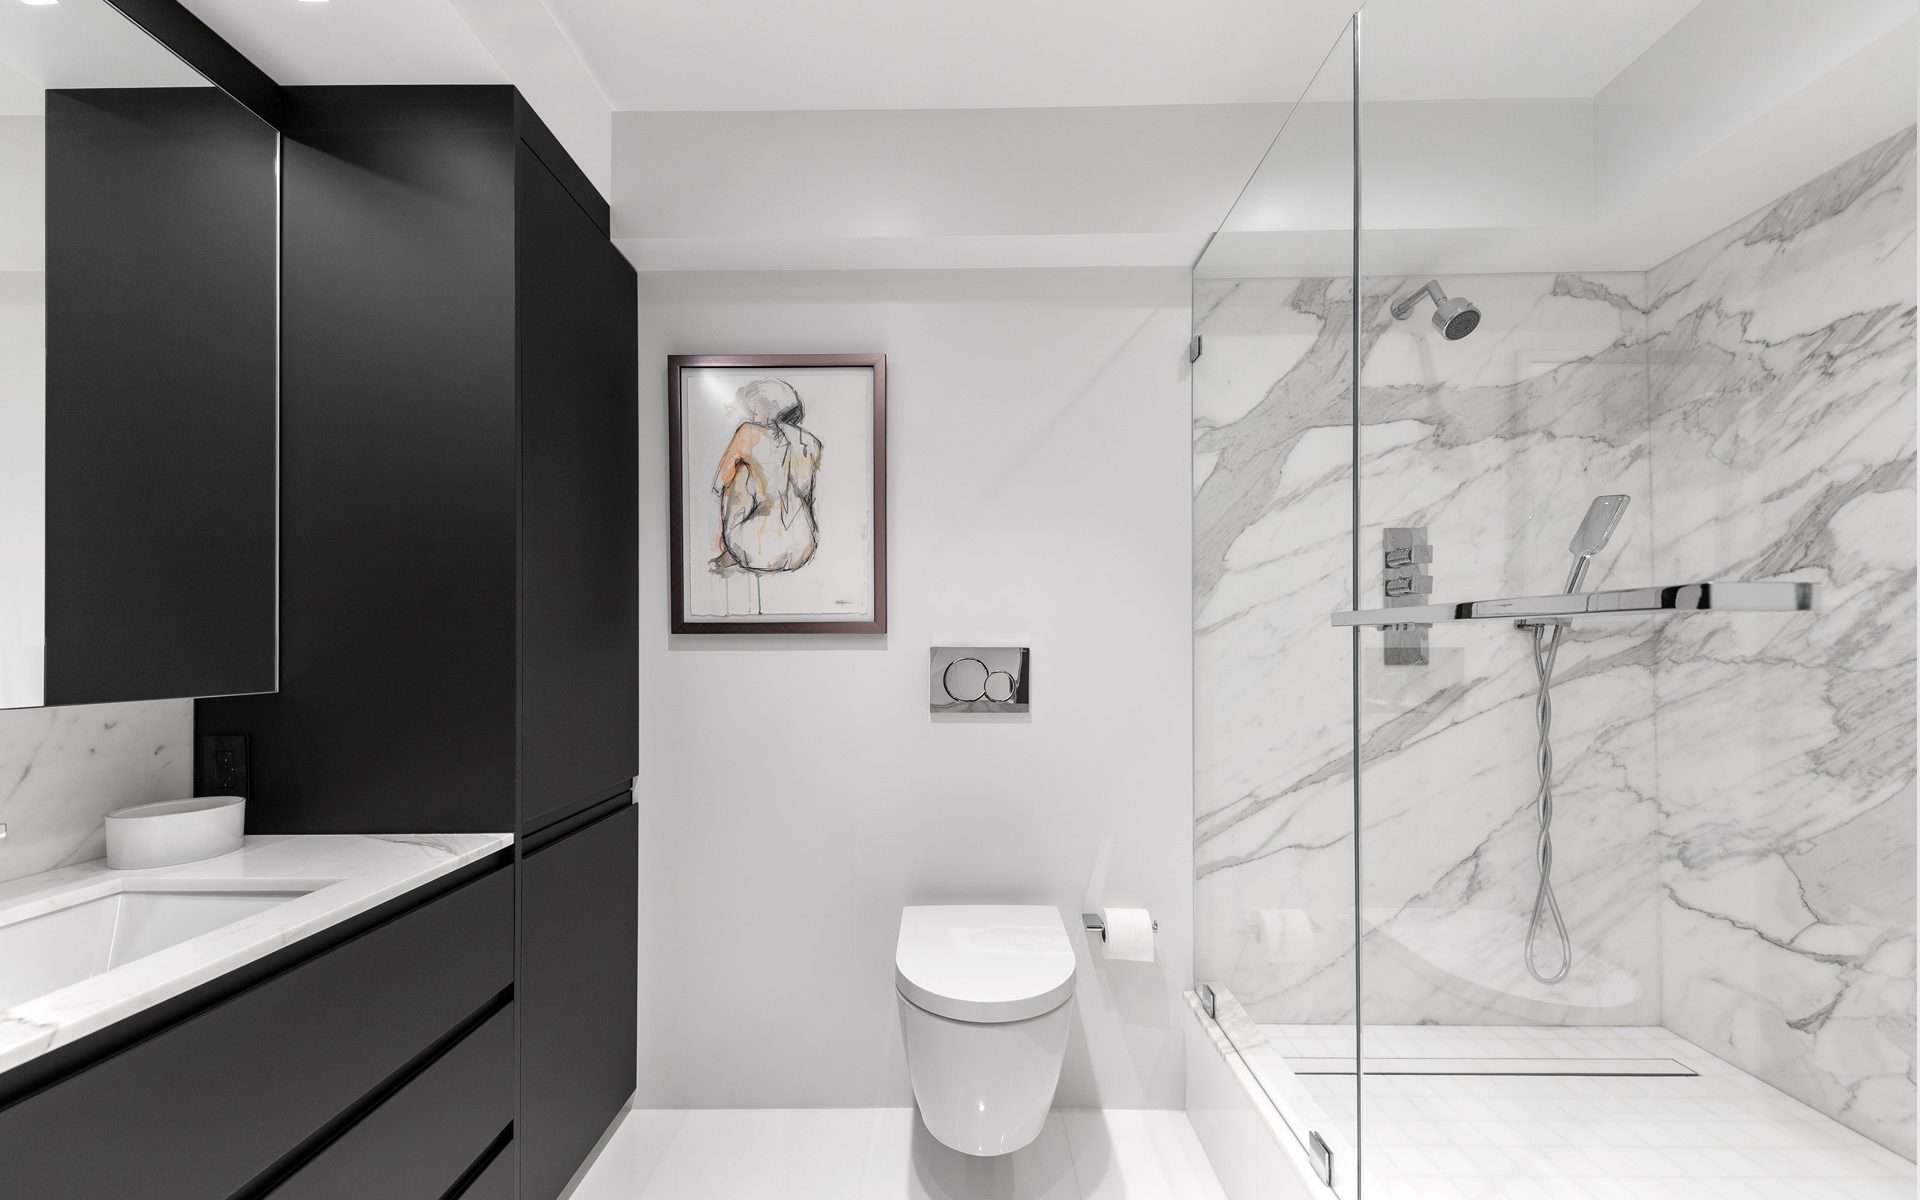 Bathroom features Bilotta black handle-less caninetry, marbled shower and modern bathroom appliances and fixtures.